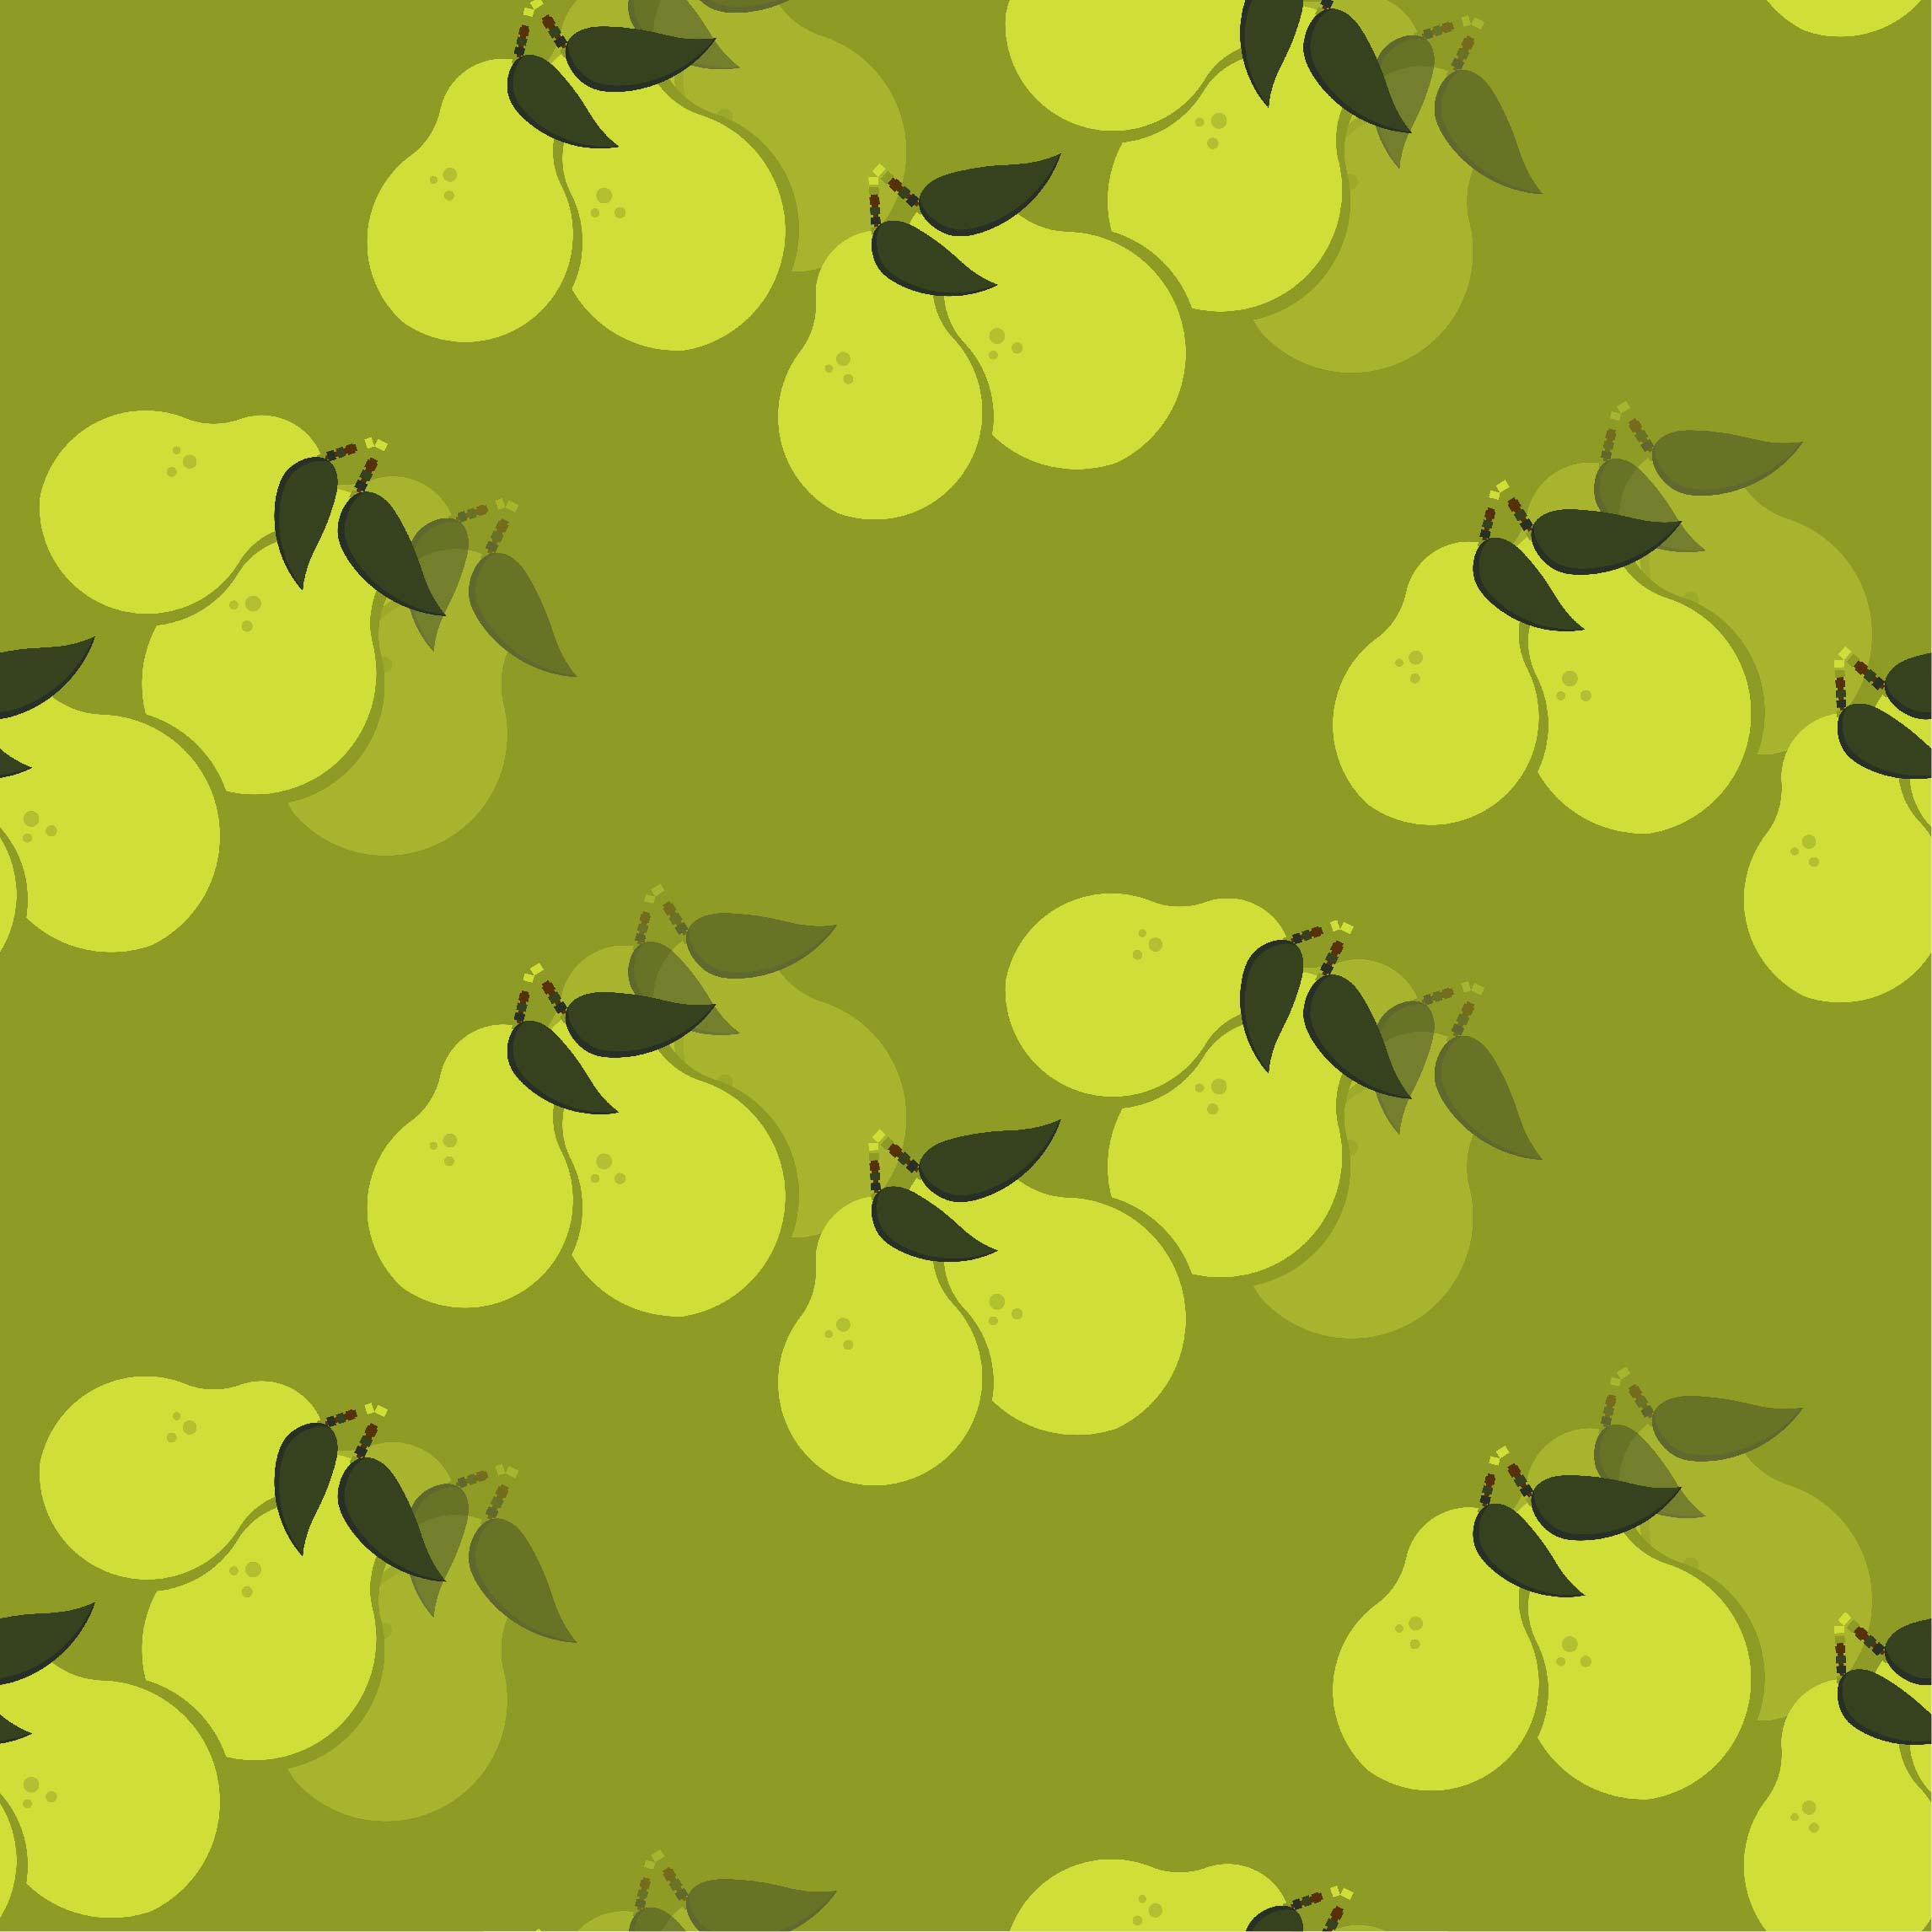 6 Seamless Pear Pattern Designs cover image.